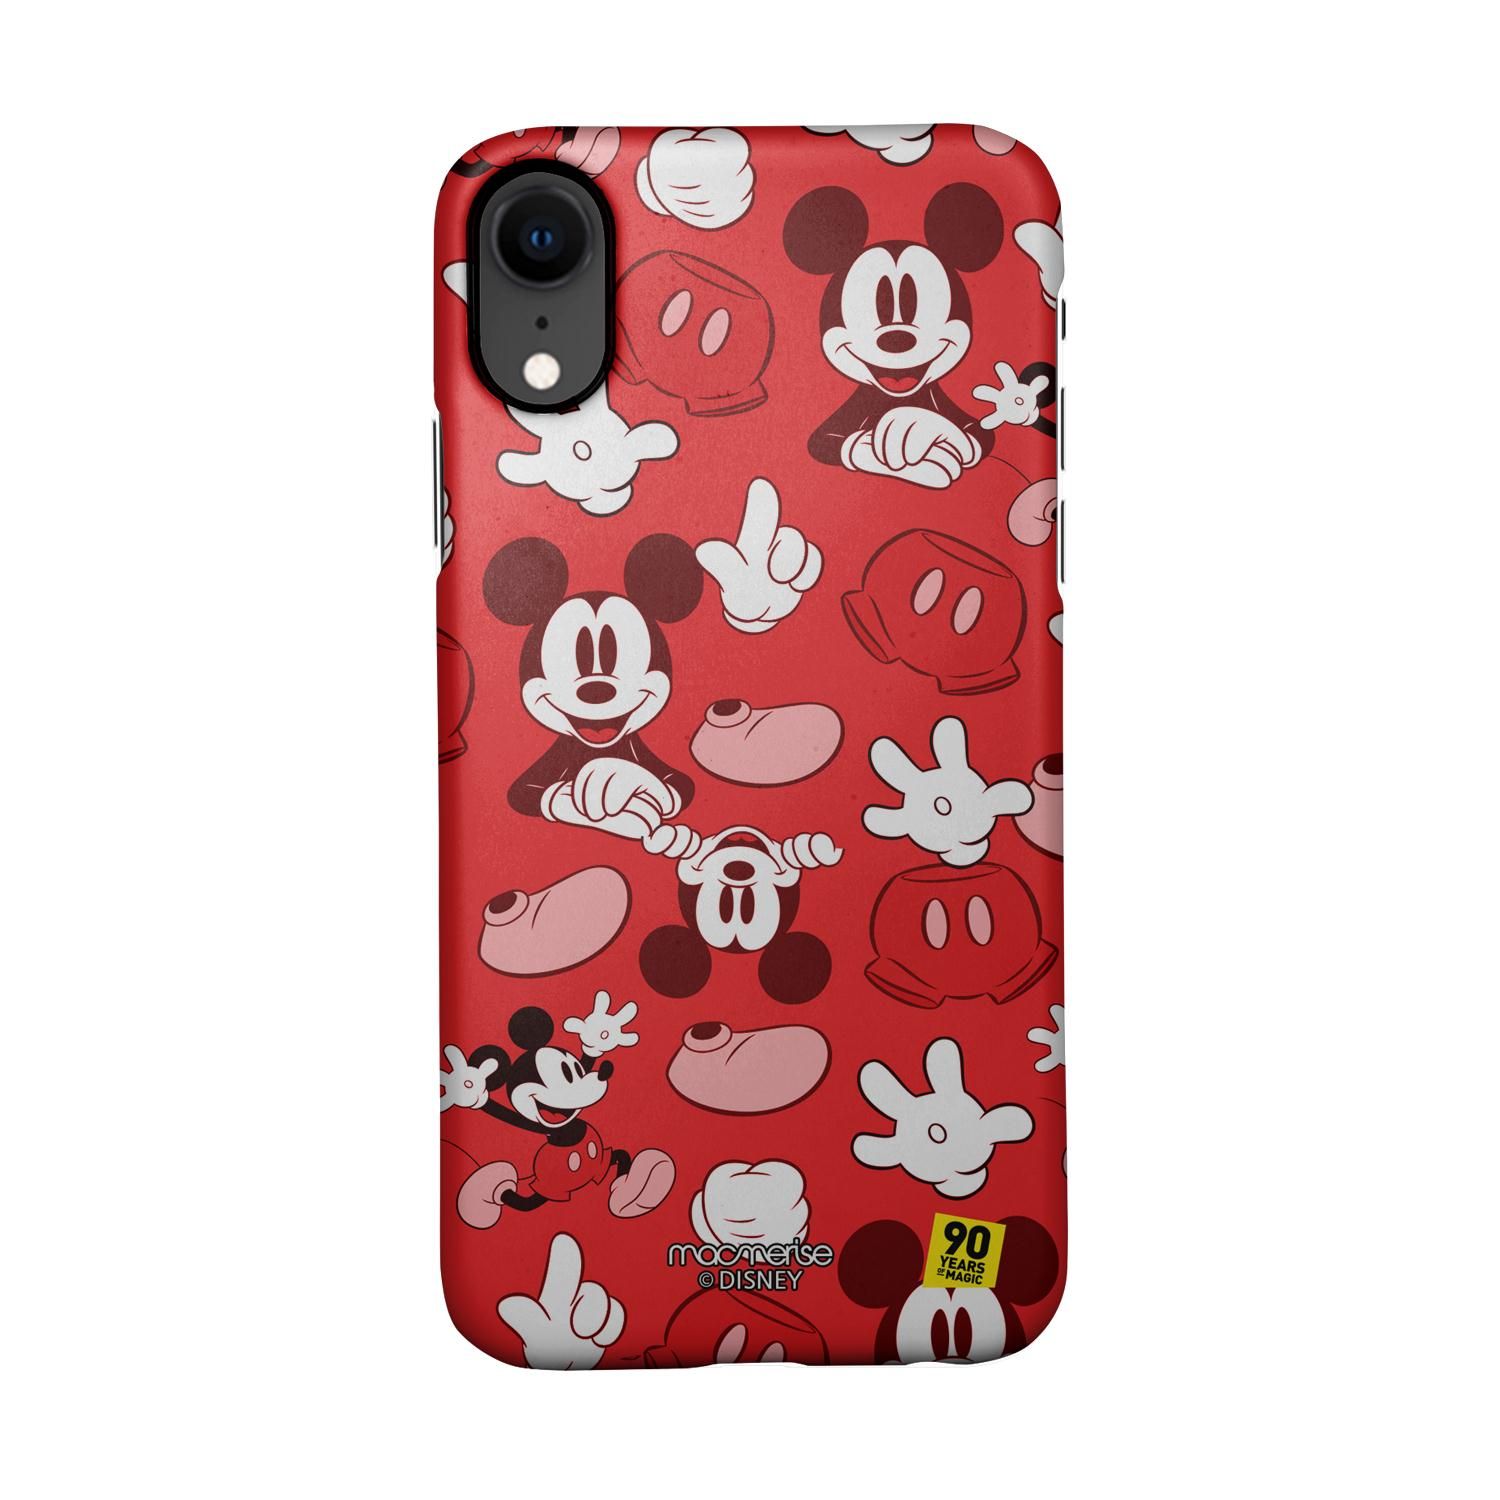 Buy Mickey classic Red - Sleek Phone Case for iPhone XR Online